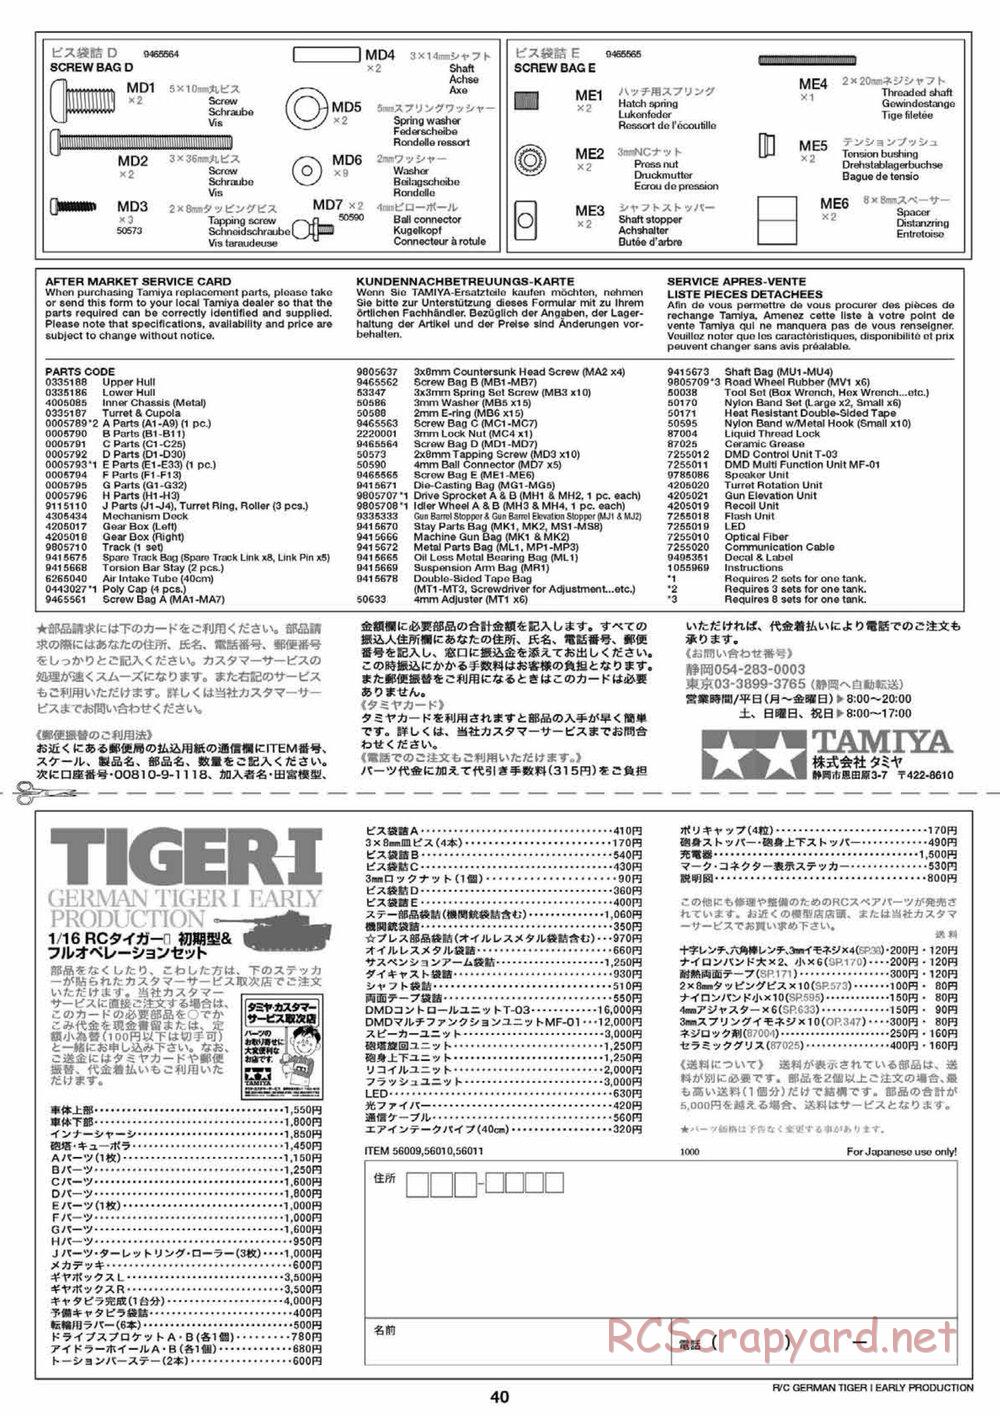 Tamiya - Tiger I Early Production - 1/16 Scale Chassis - Manual - Page 40